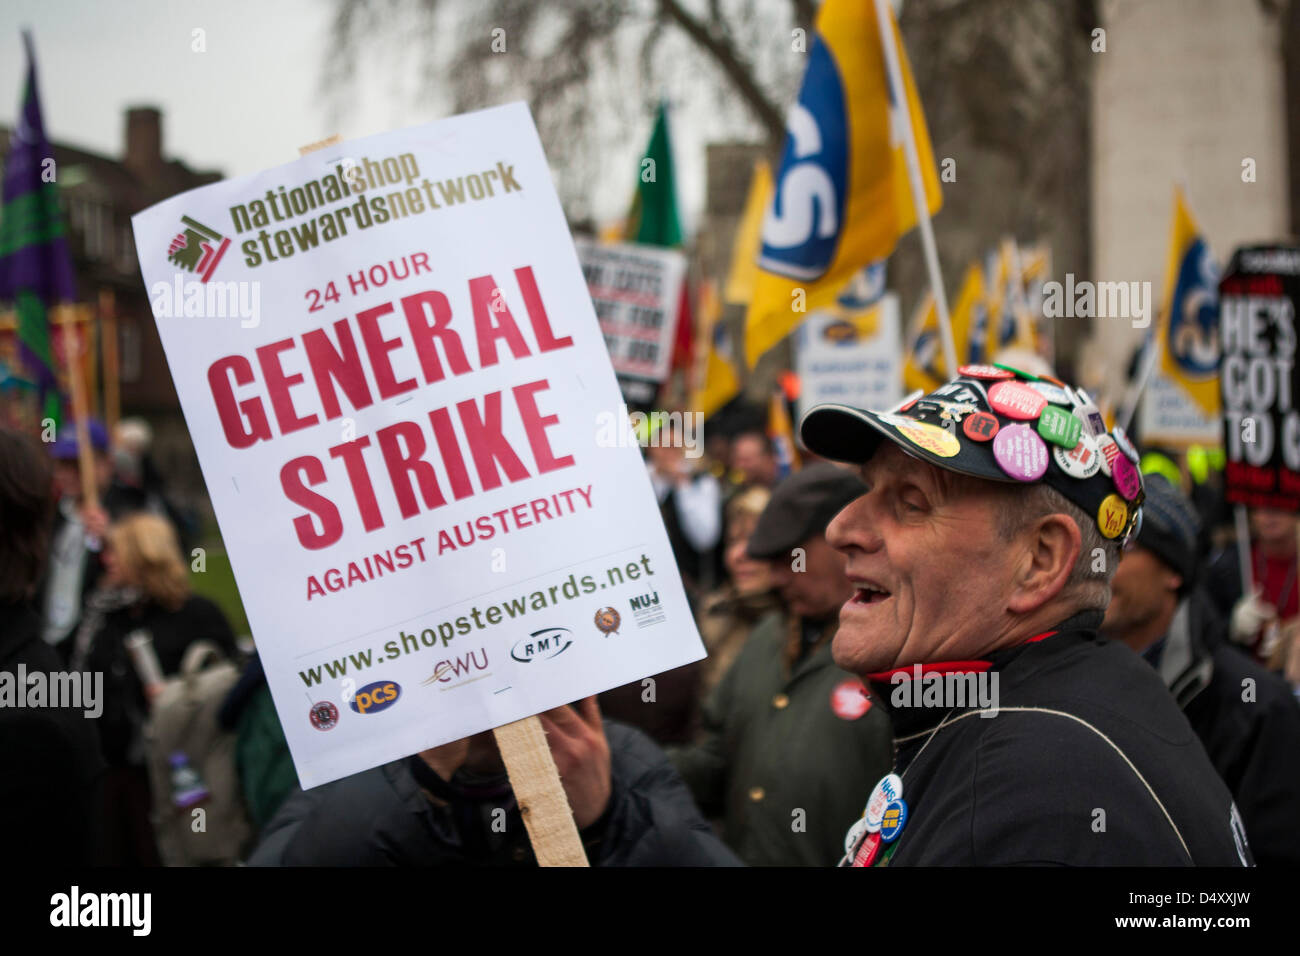 London, UK. 20th March 2013. Protestor holds General Strike placard at PCS rally held by striking members outside the Houses of Parliament. Credit:  martyn wheatley / Alamy Live News Stock Photo